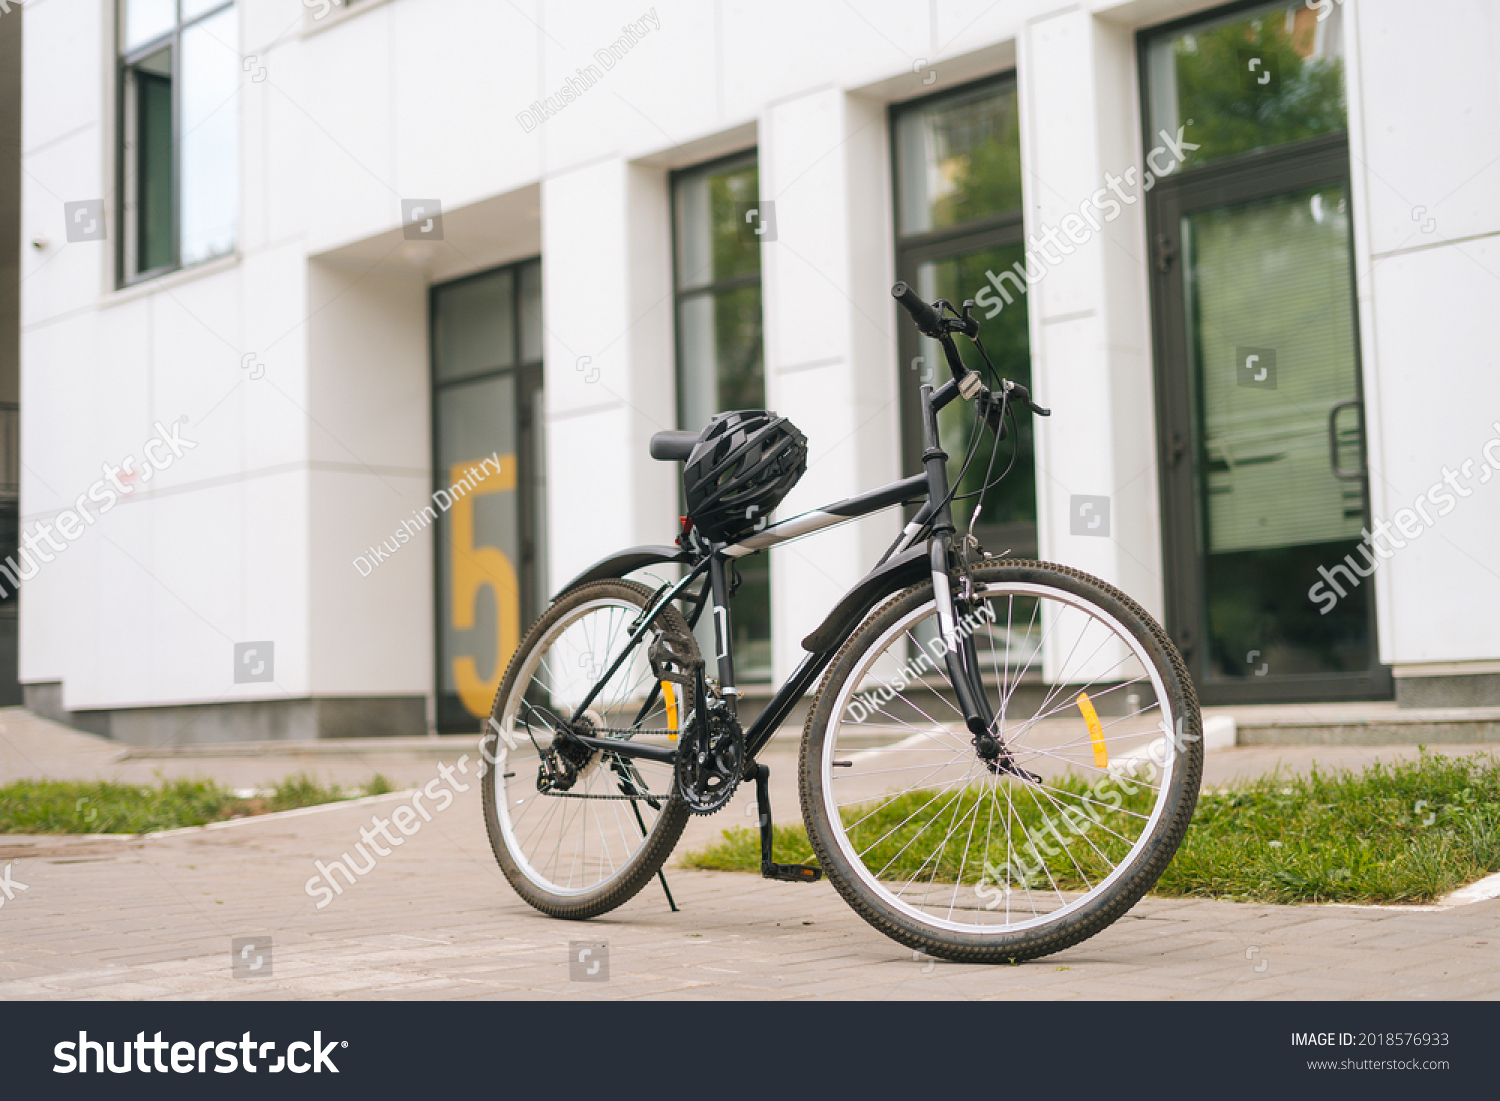 Modern bicycle standin on footplate in city street on blurred background of front door of apartment building, office building. Protective helmet lies on seat of bike, outdoors, no people, nobody. #2018576933